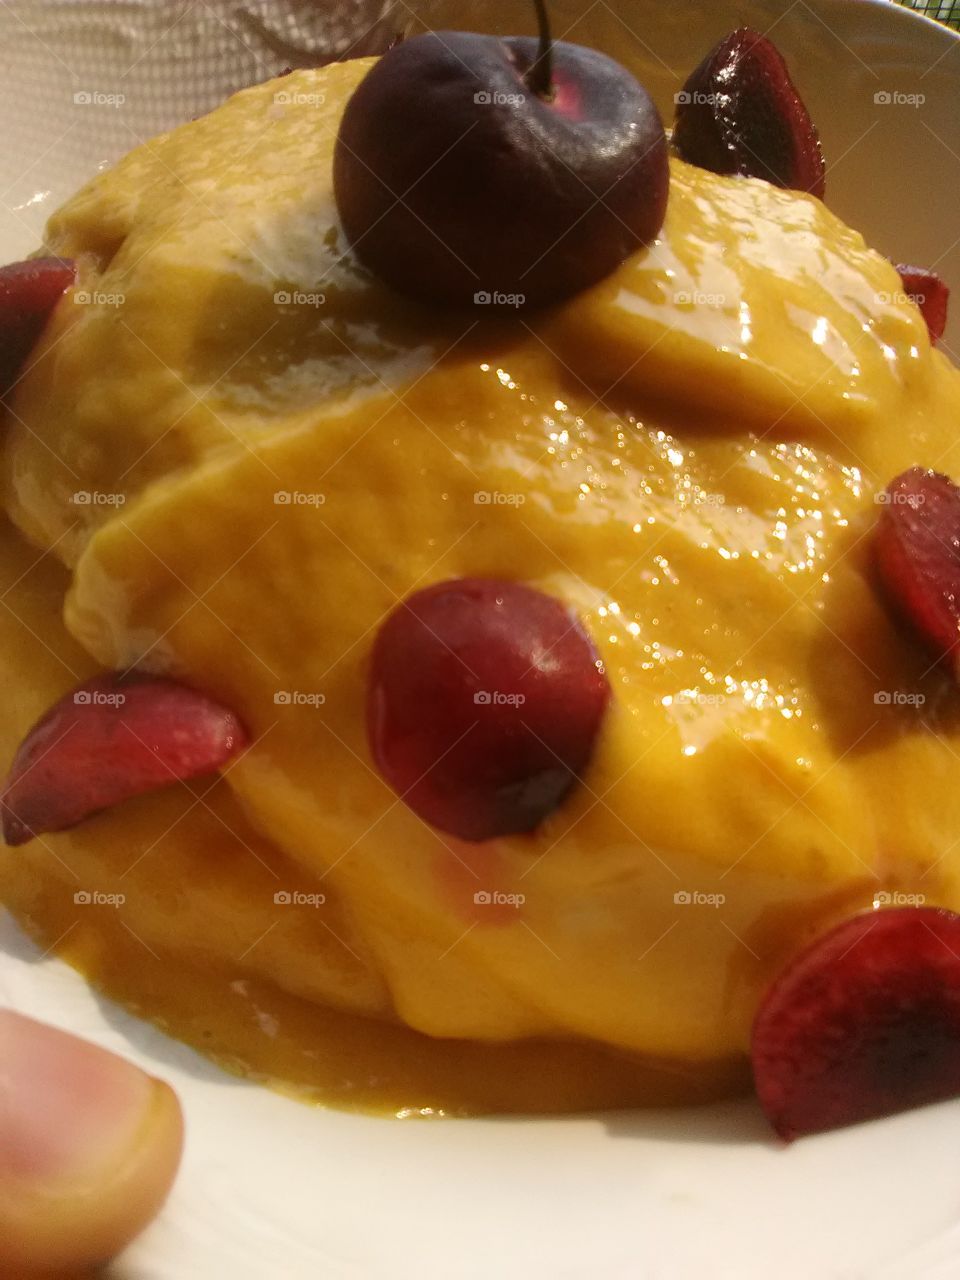 rawvegan ice cream (tropical)
with cherries on top of course